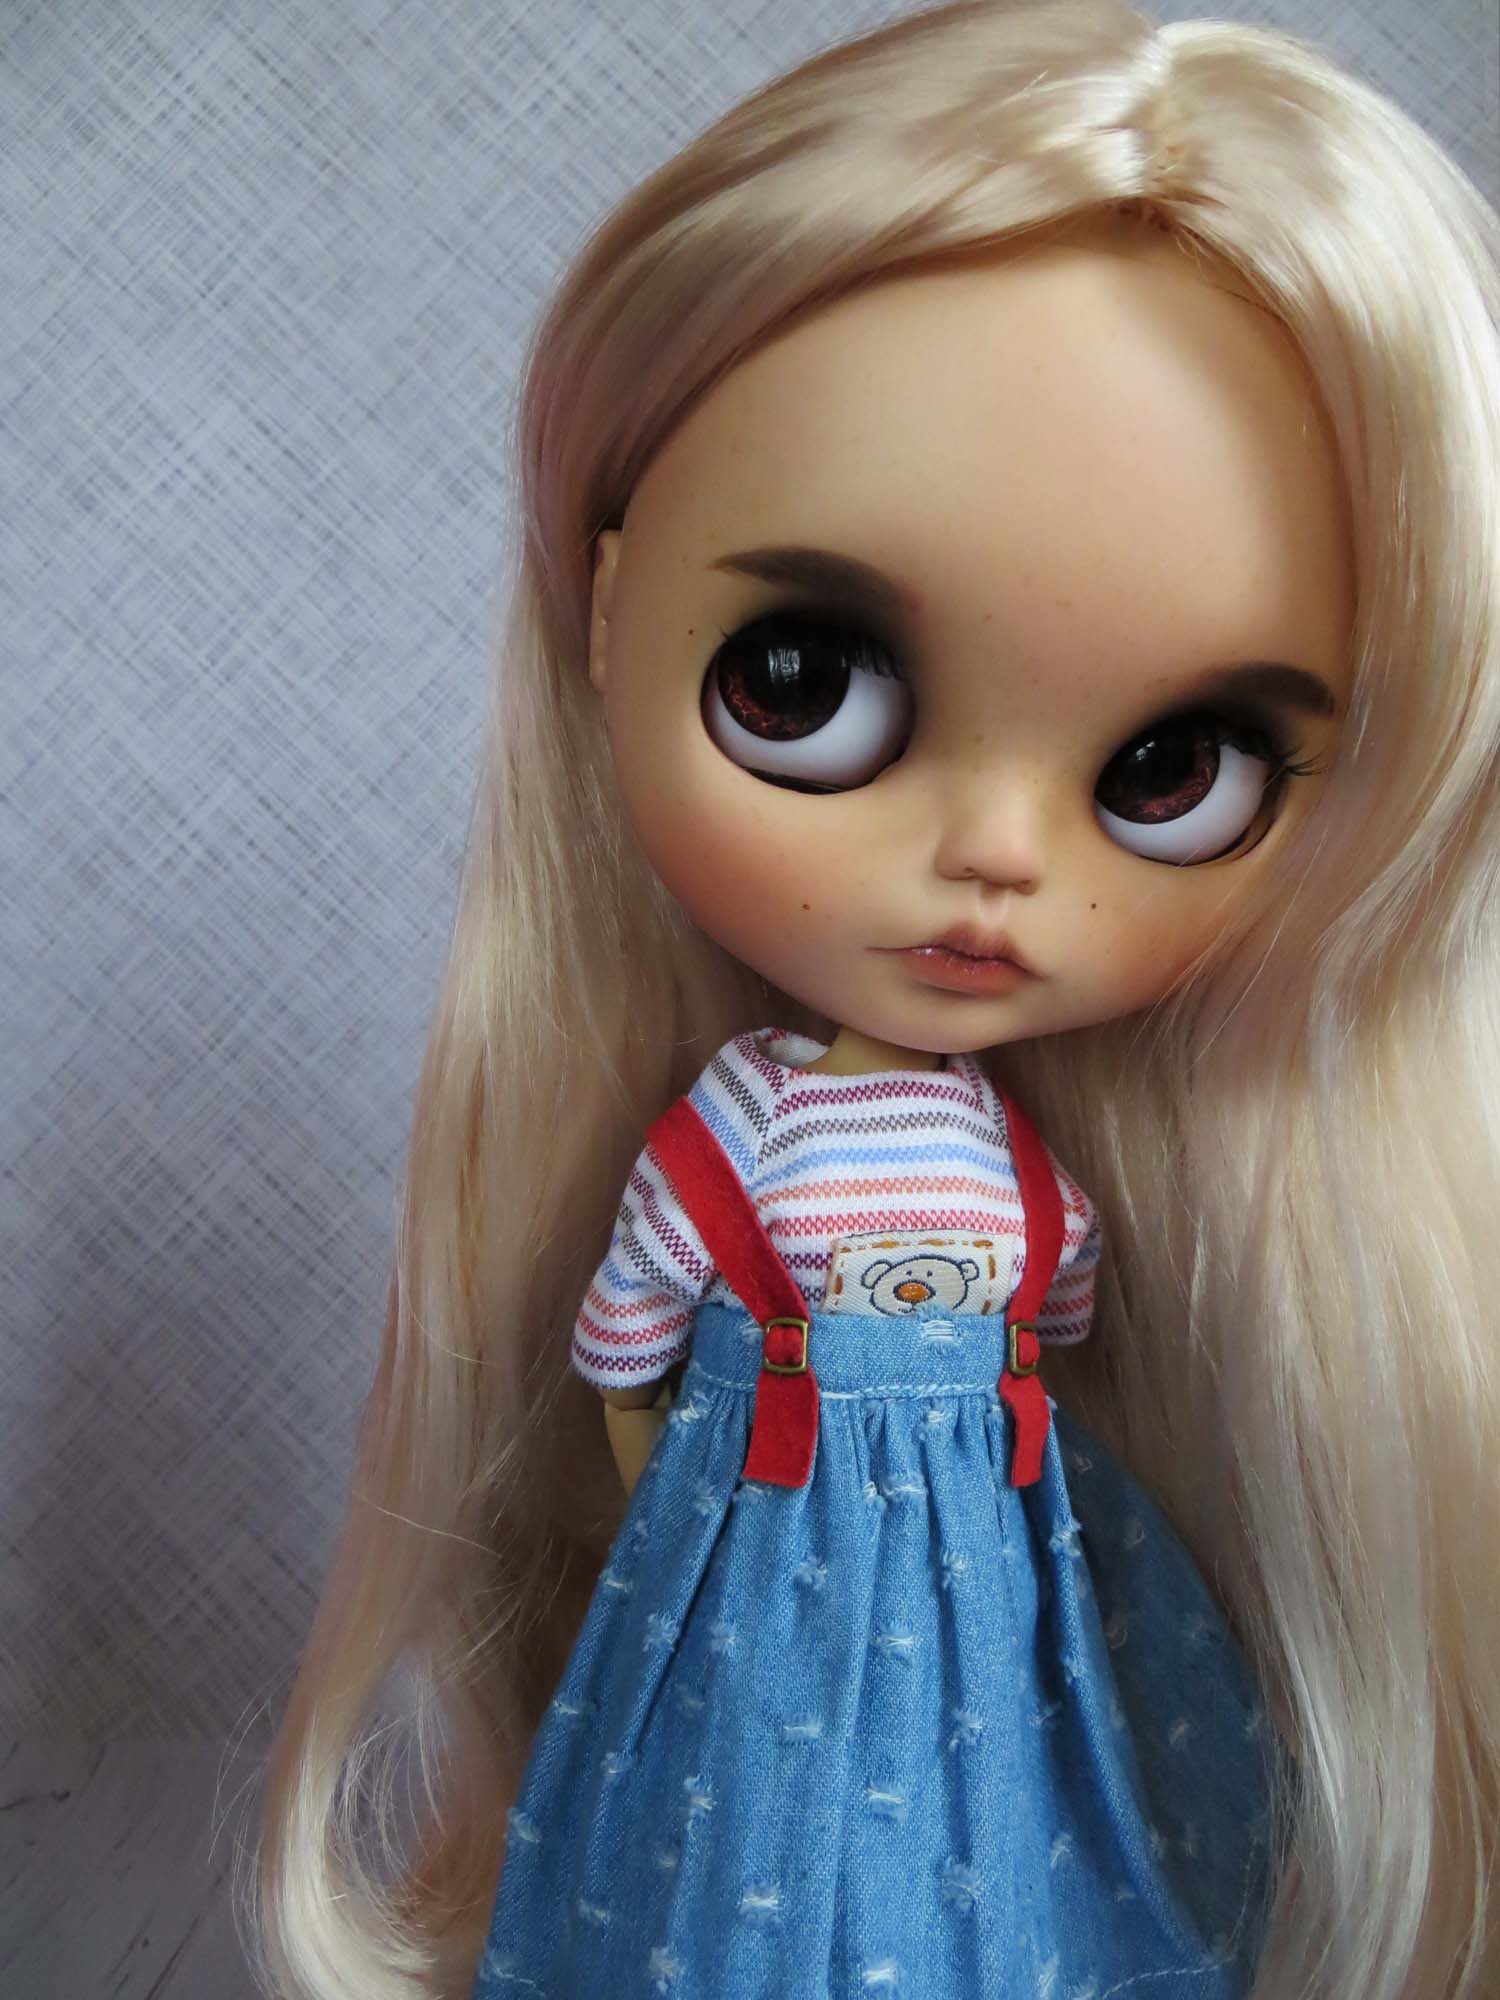 Catovasia - Blythe doll customizer profile page at DollyCustom